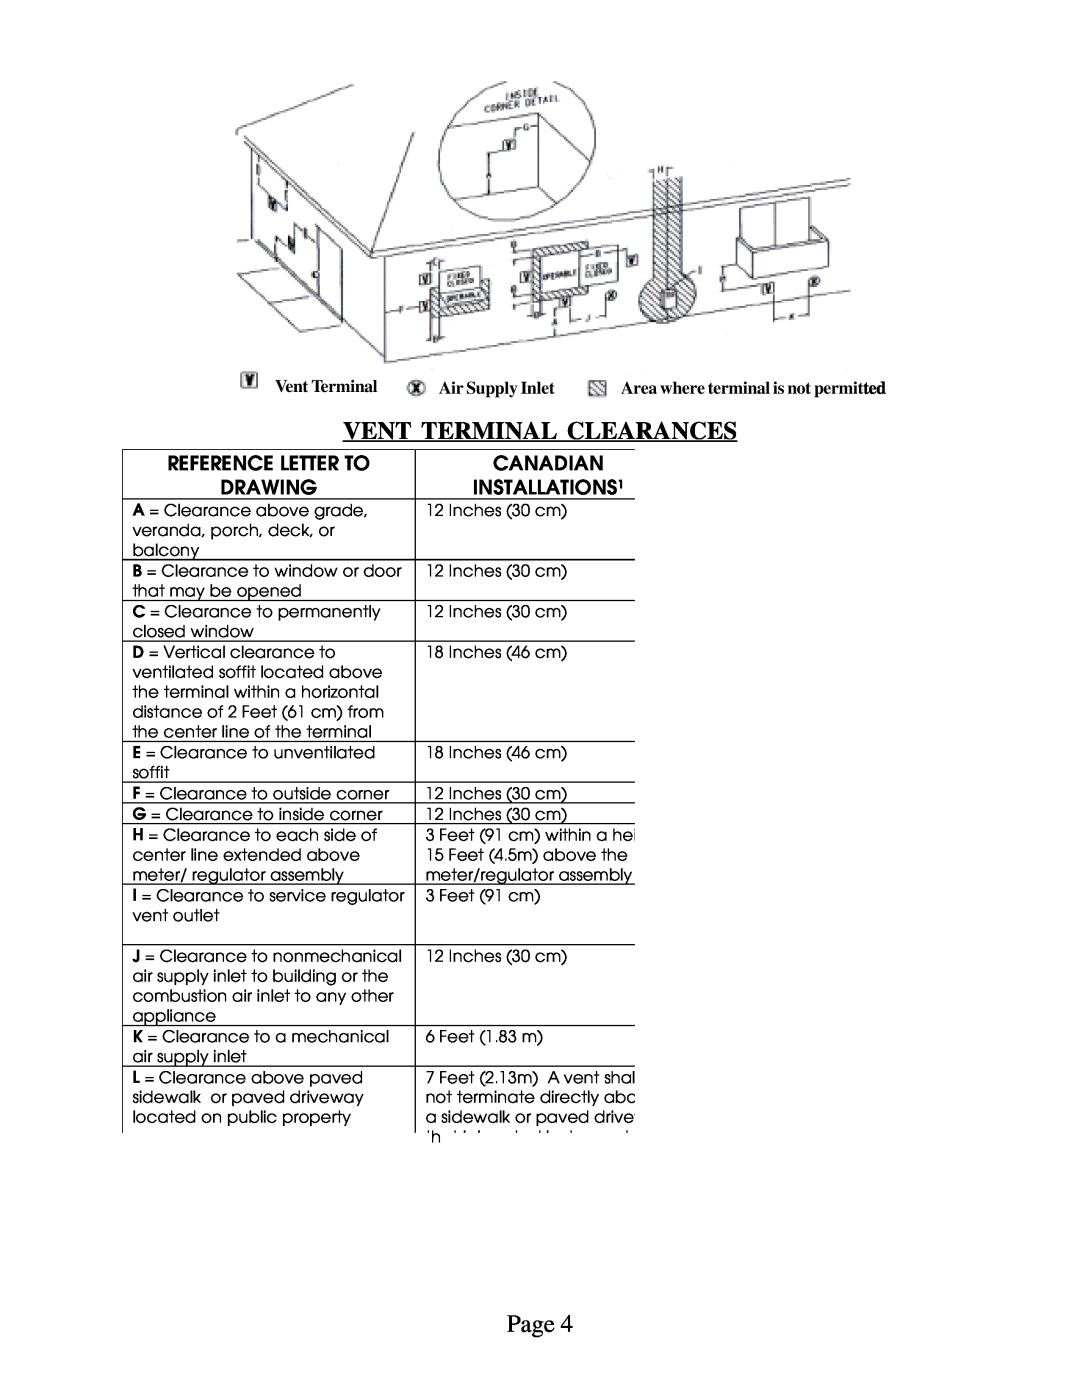 Louisville Tin and Stove HEDV403, HEDV404 Vent Terminal Clearances, Reference Letter To, Canadian, Drawing, INSTALLATIONS¹ 